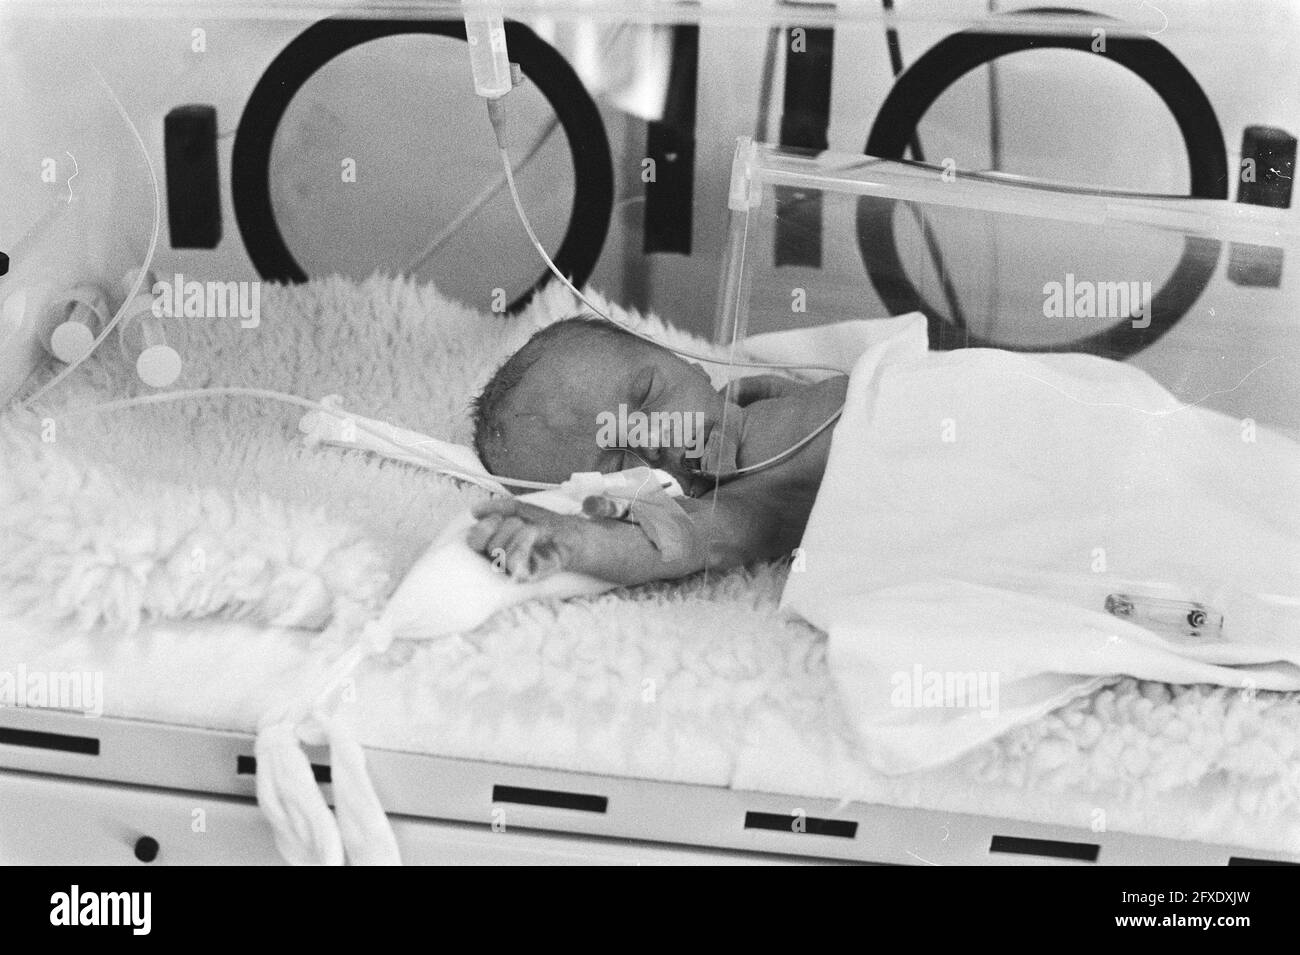 Koen in the incubator, October 14 1983, babies, incubators, multiple births, The Netherlands, 20th century press agency photo, news to remember, documentary, historic photography 1945-1990, visual stories, human history of the Twentieth Century, capturing moments in time Stock Photo